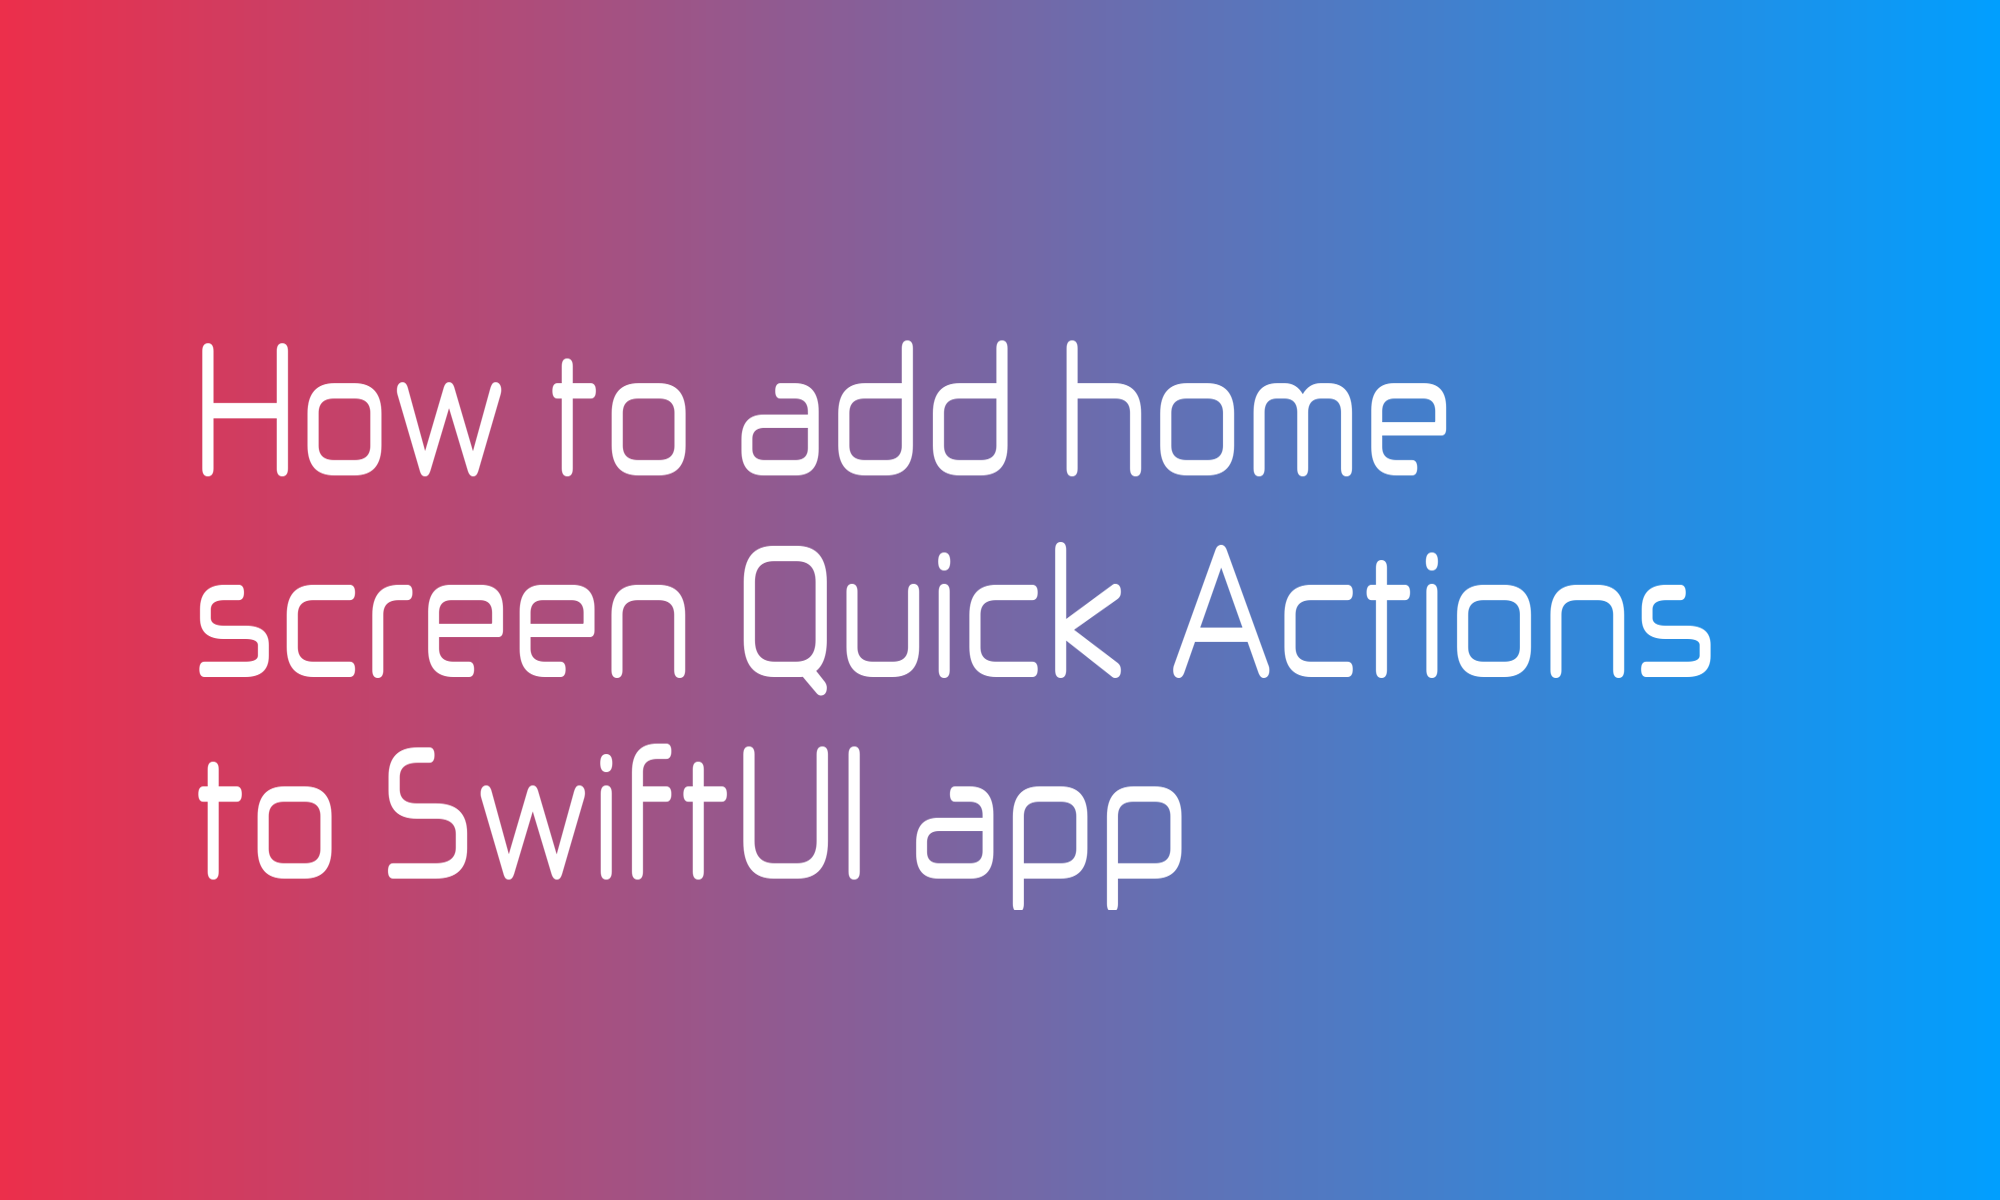 How to add home screen Quick Actions to SwiftUI app